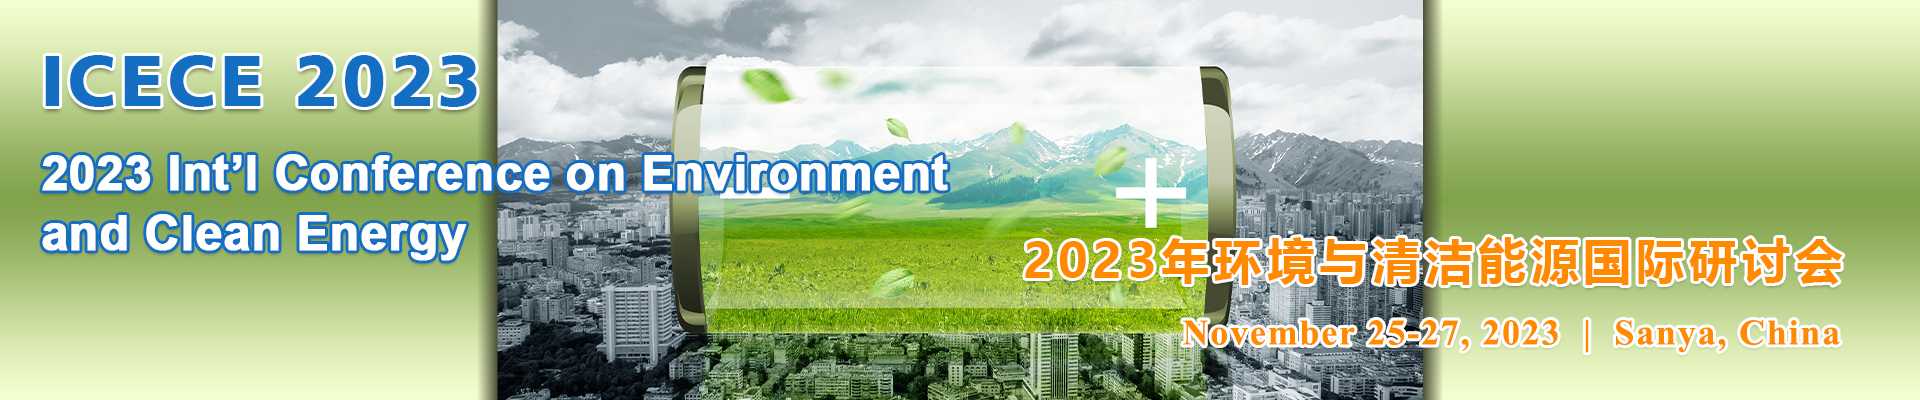 2023 Int’l Conference on Environment and Clean Energy (ICECE 2023), Sanya, Hainan, China